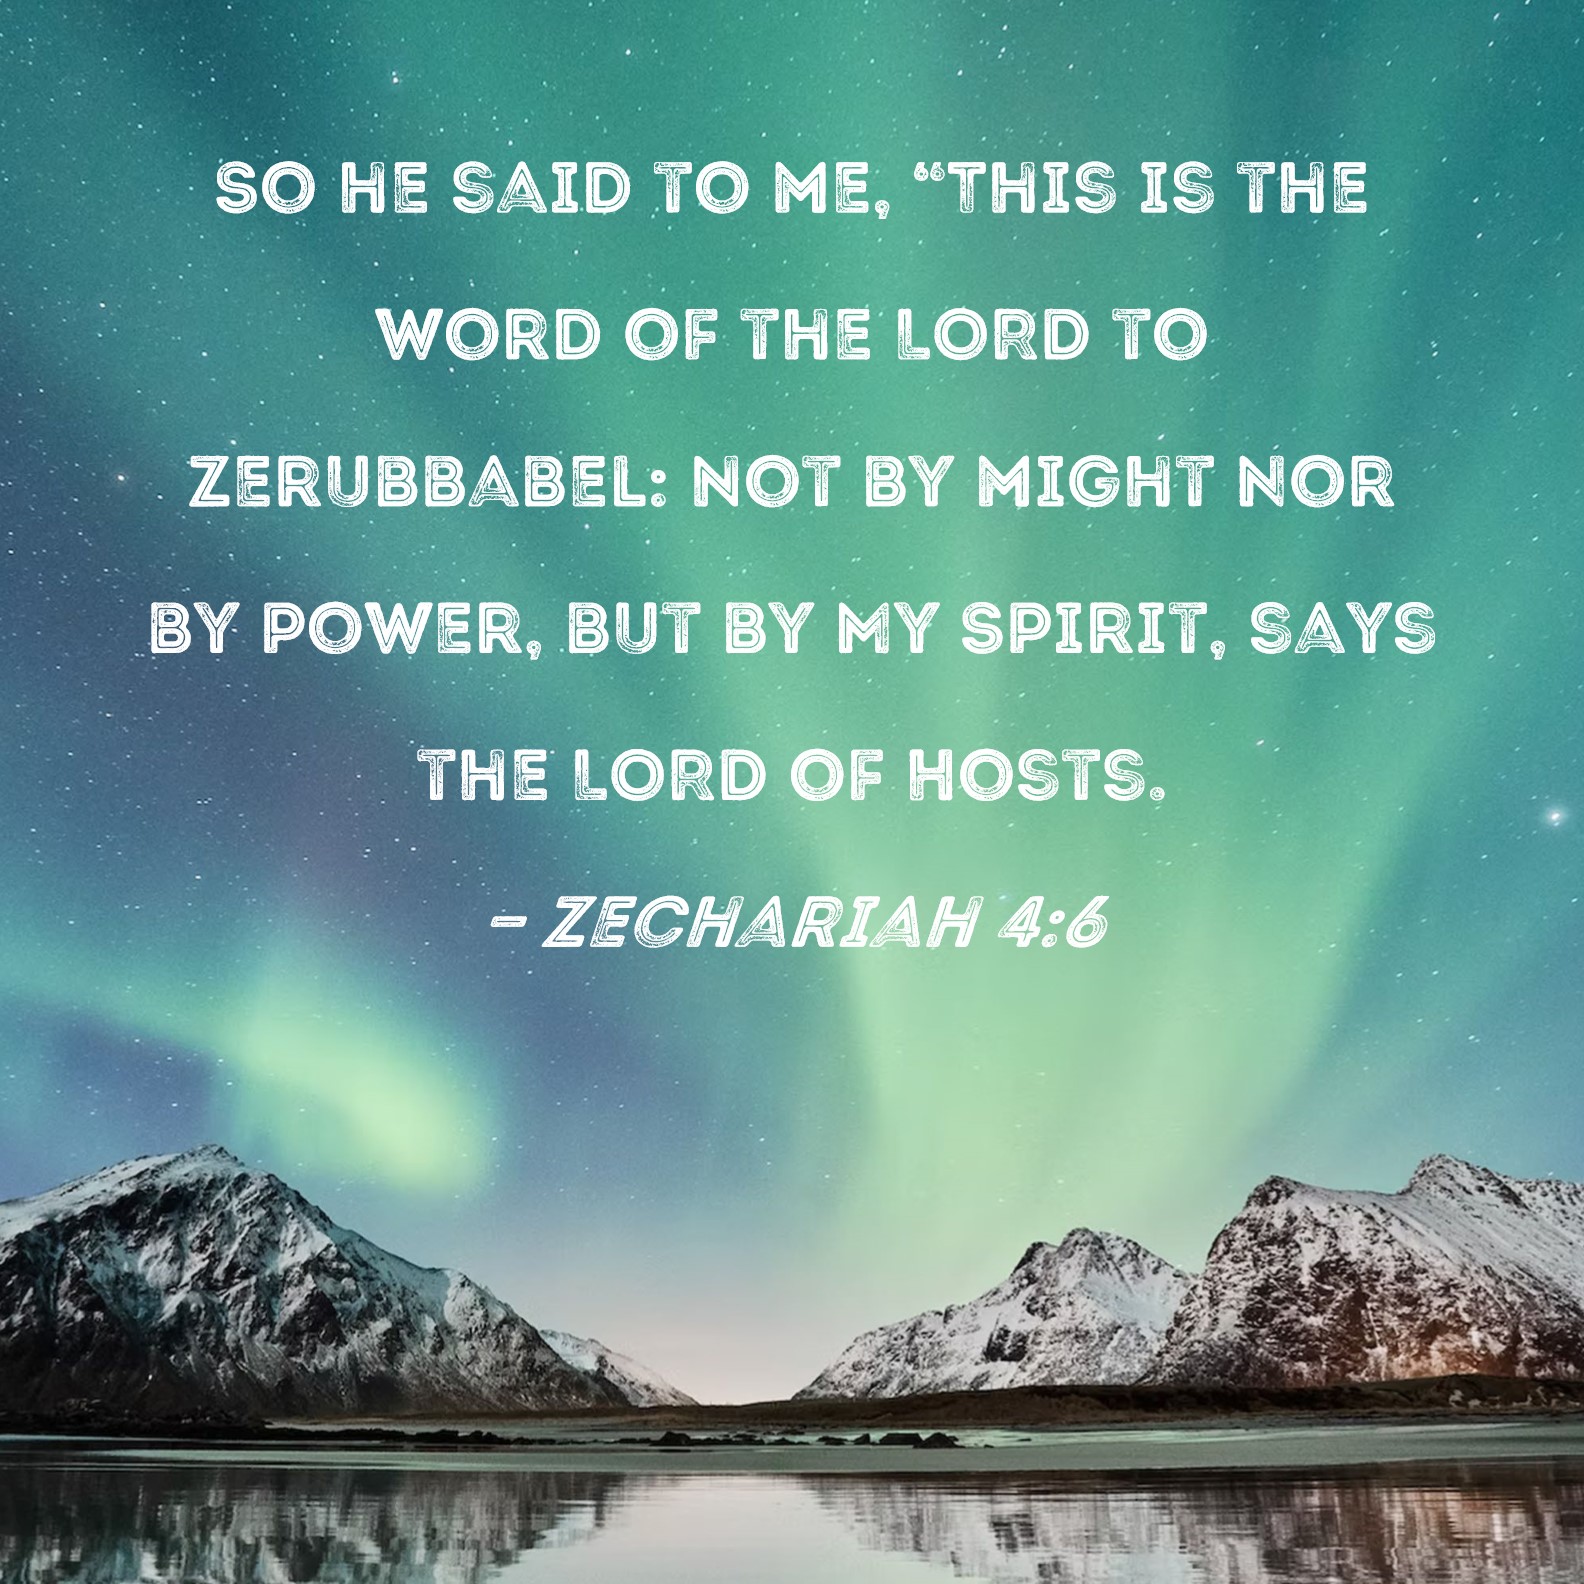 Zechariah 4:6 So he said to me, This is the word of the LORD to  Zerubbabel: Not by might nor by power, but by My Spirit, says the LORD of  Hosts.